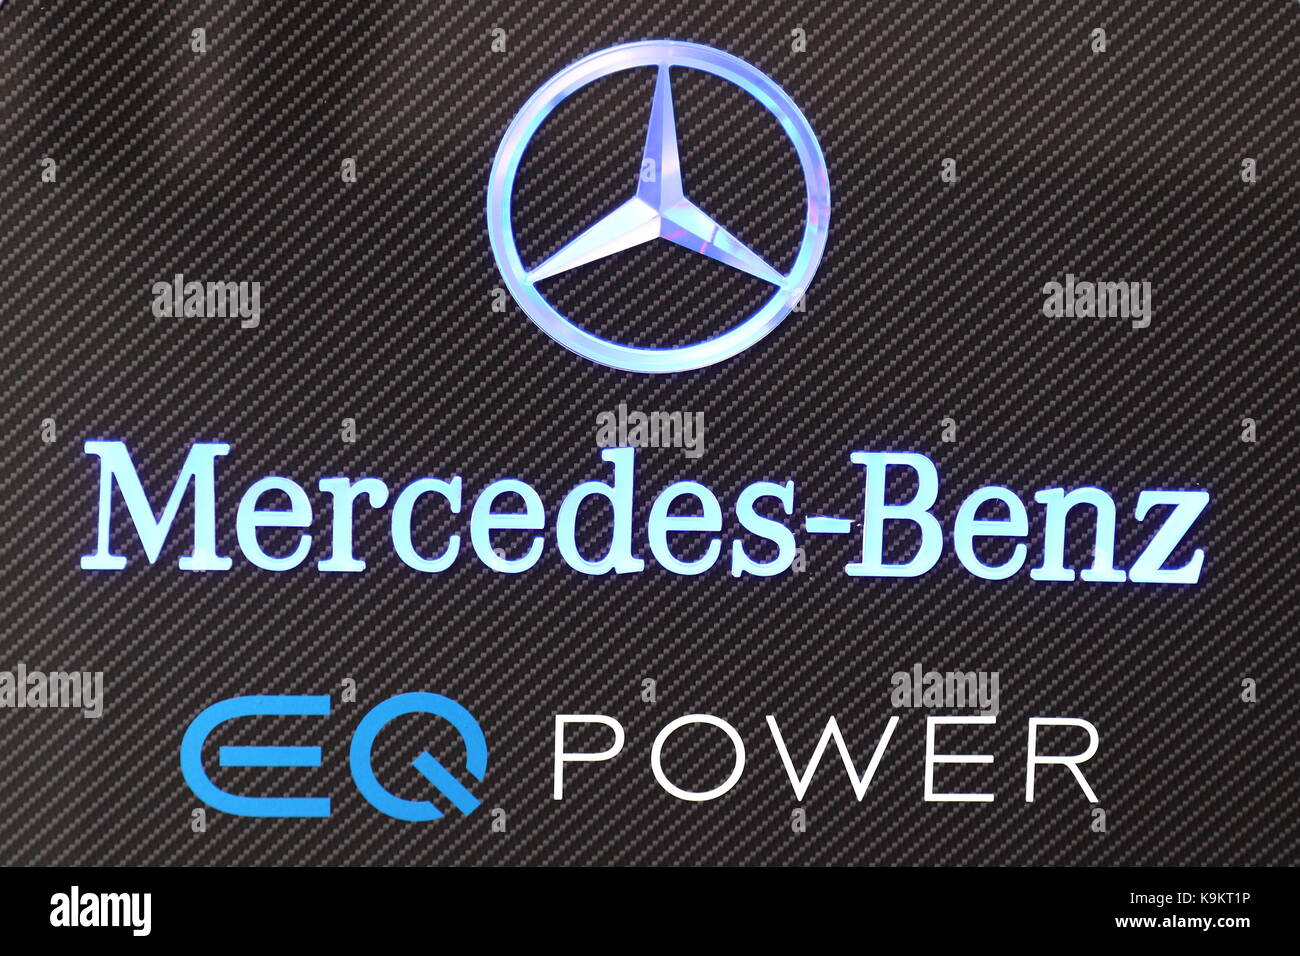 Mercedes-Benz promoted hybrid cars under the logo and brand EQ Power at the Frankfurt Motor Show 2017 in Germany Stock Photo